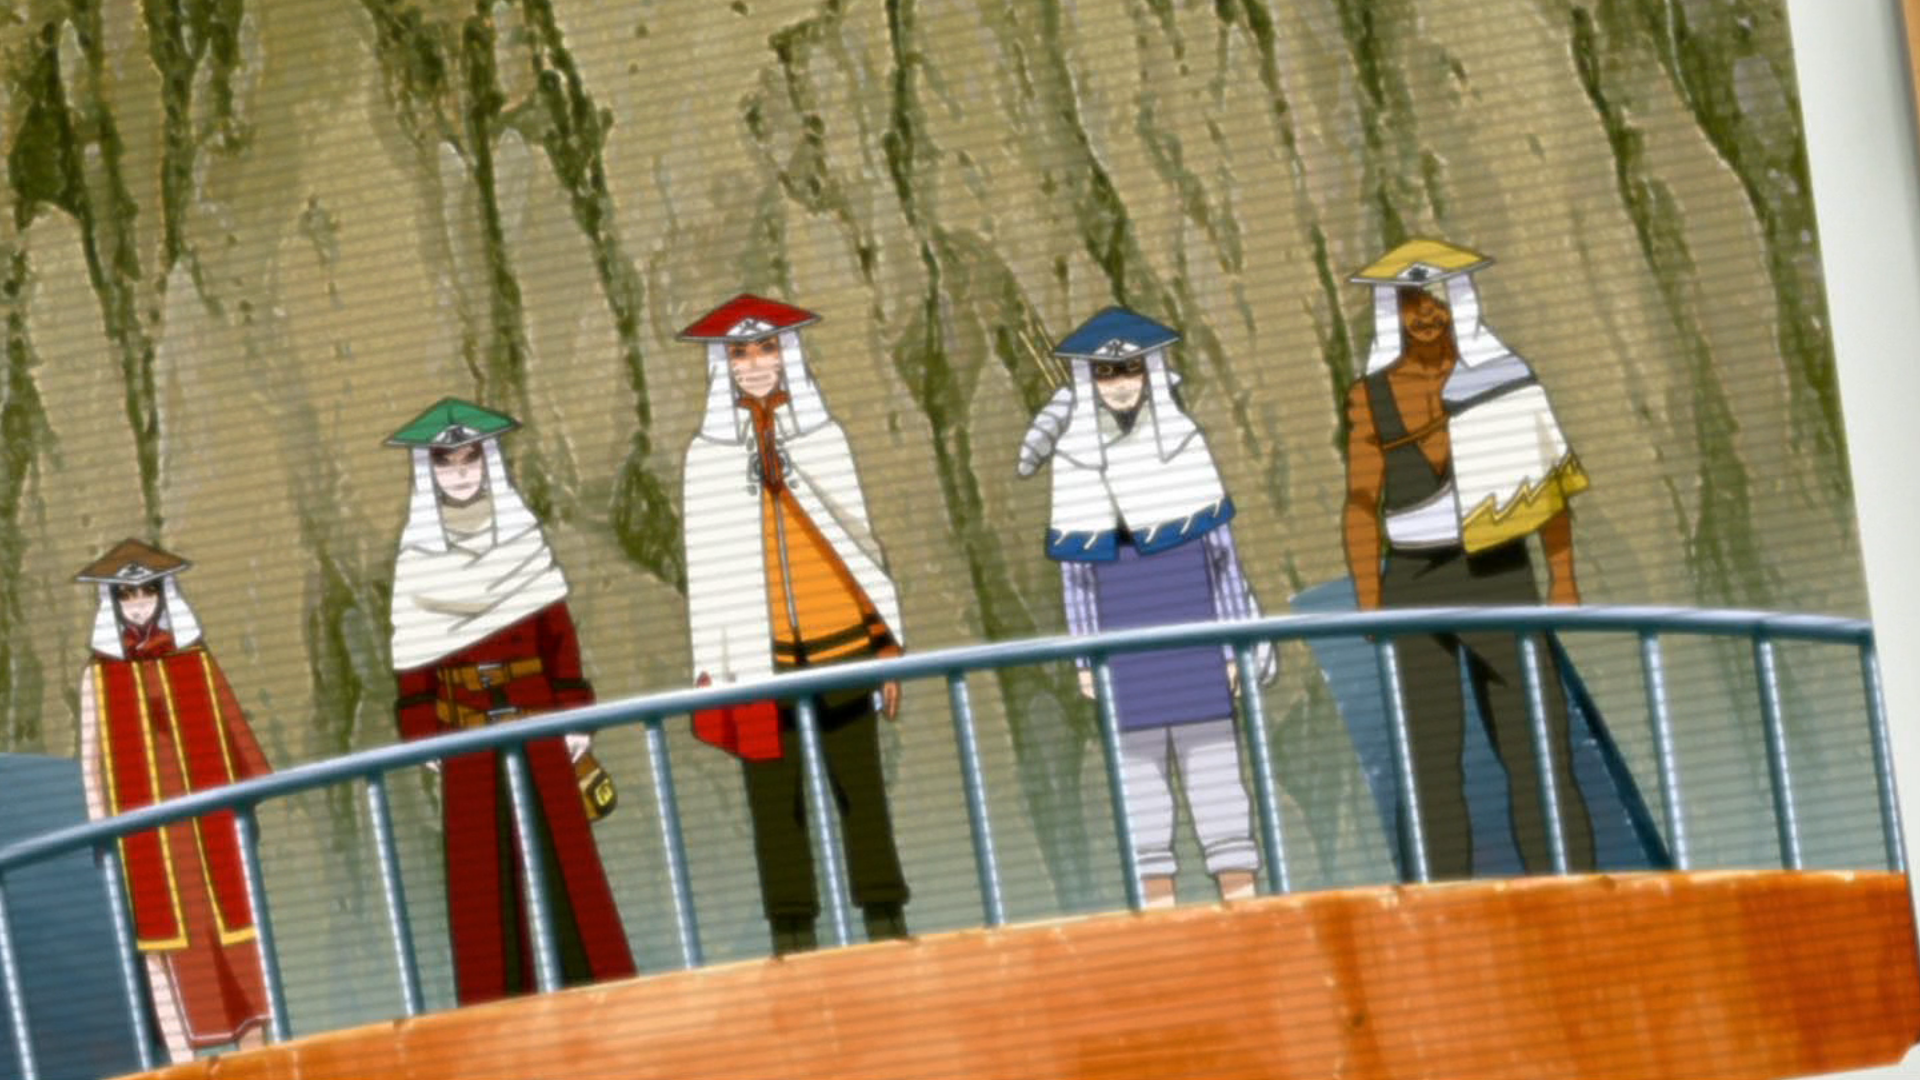 all kage hats